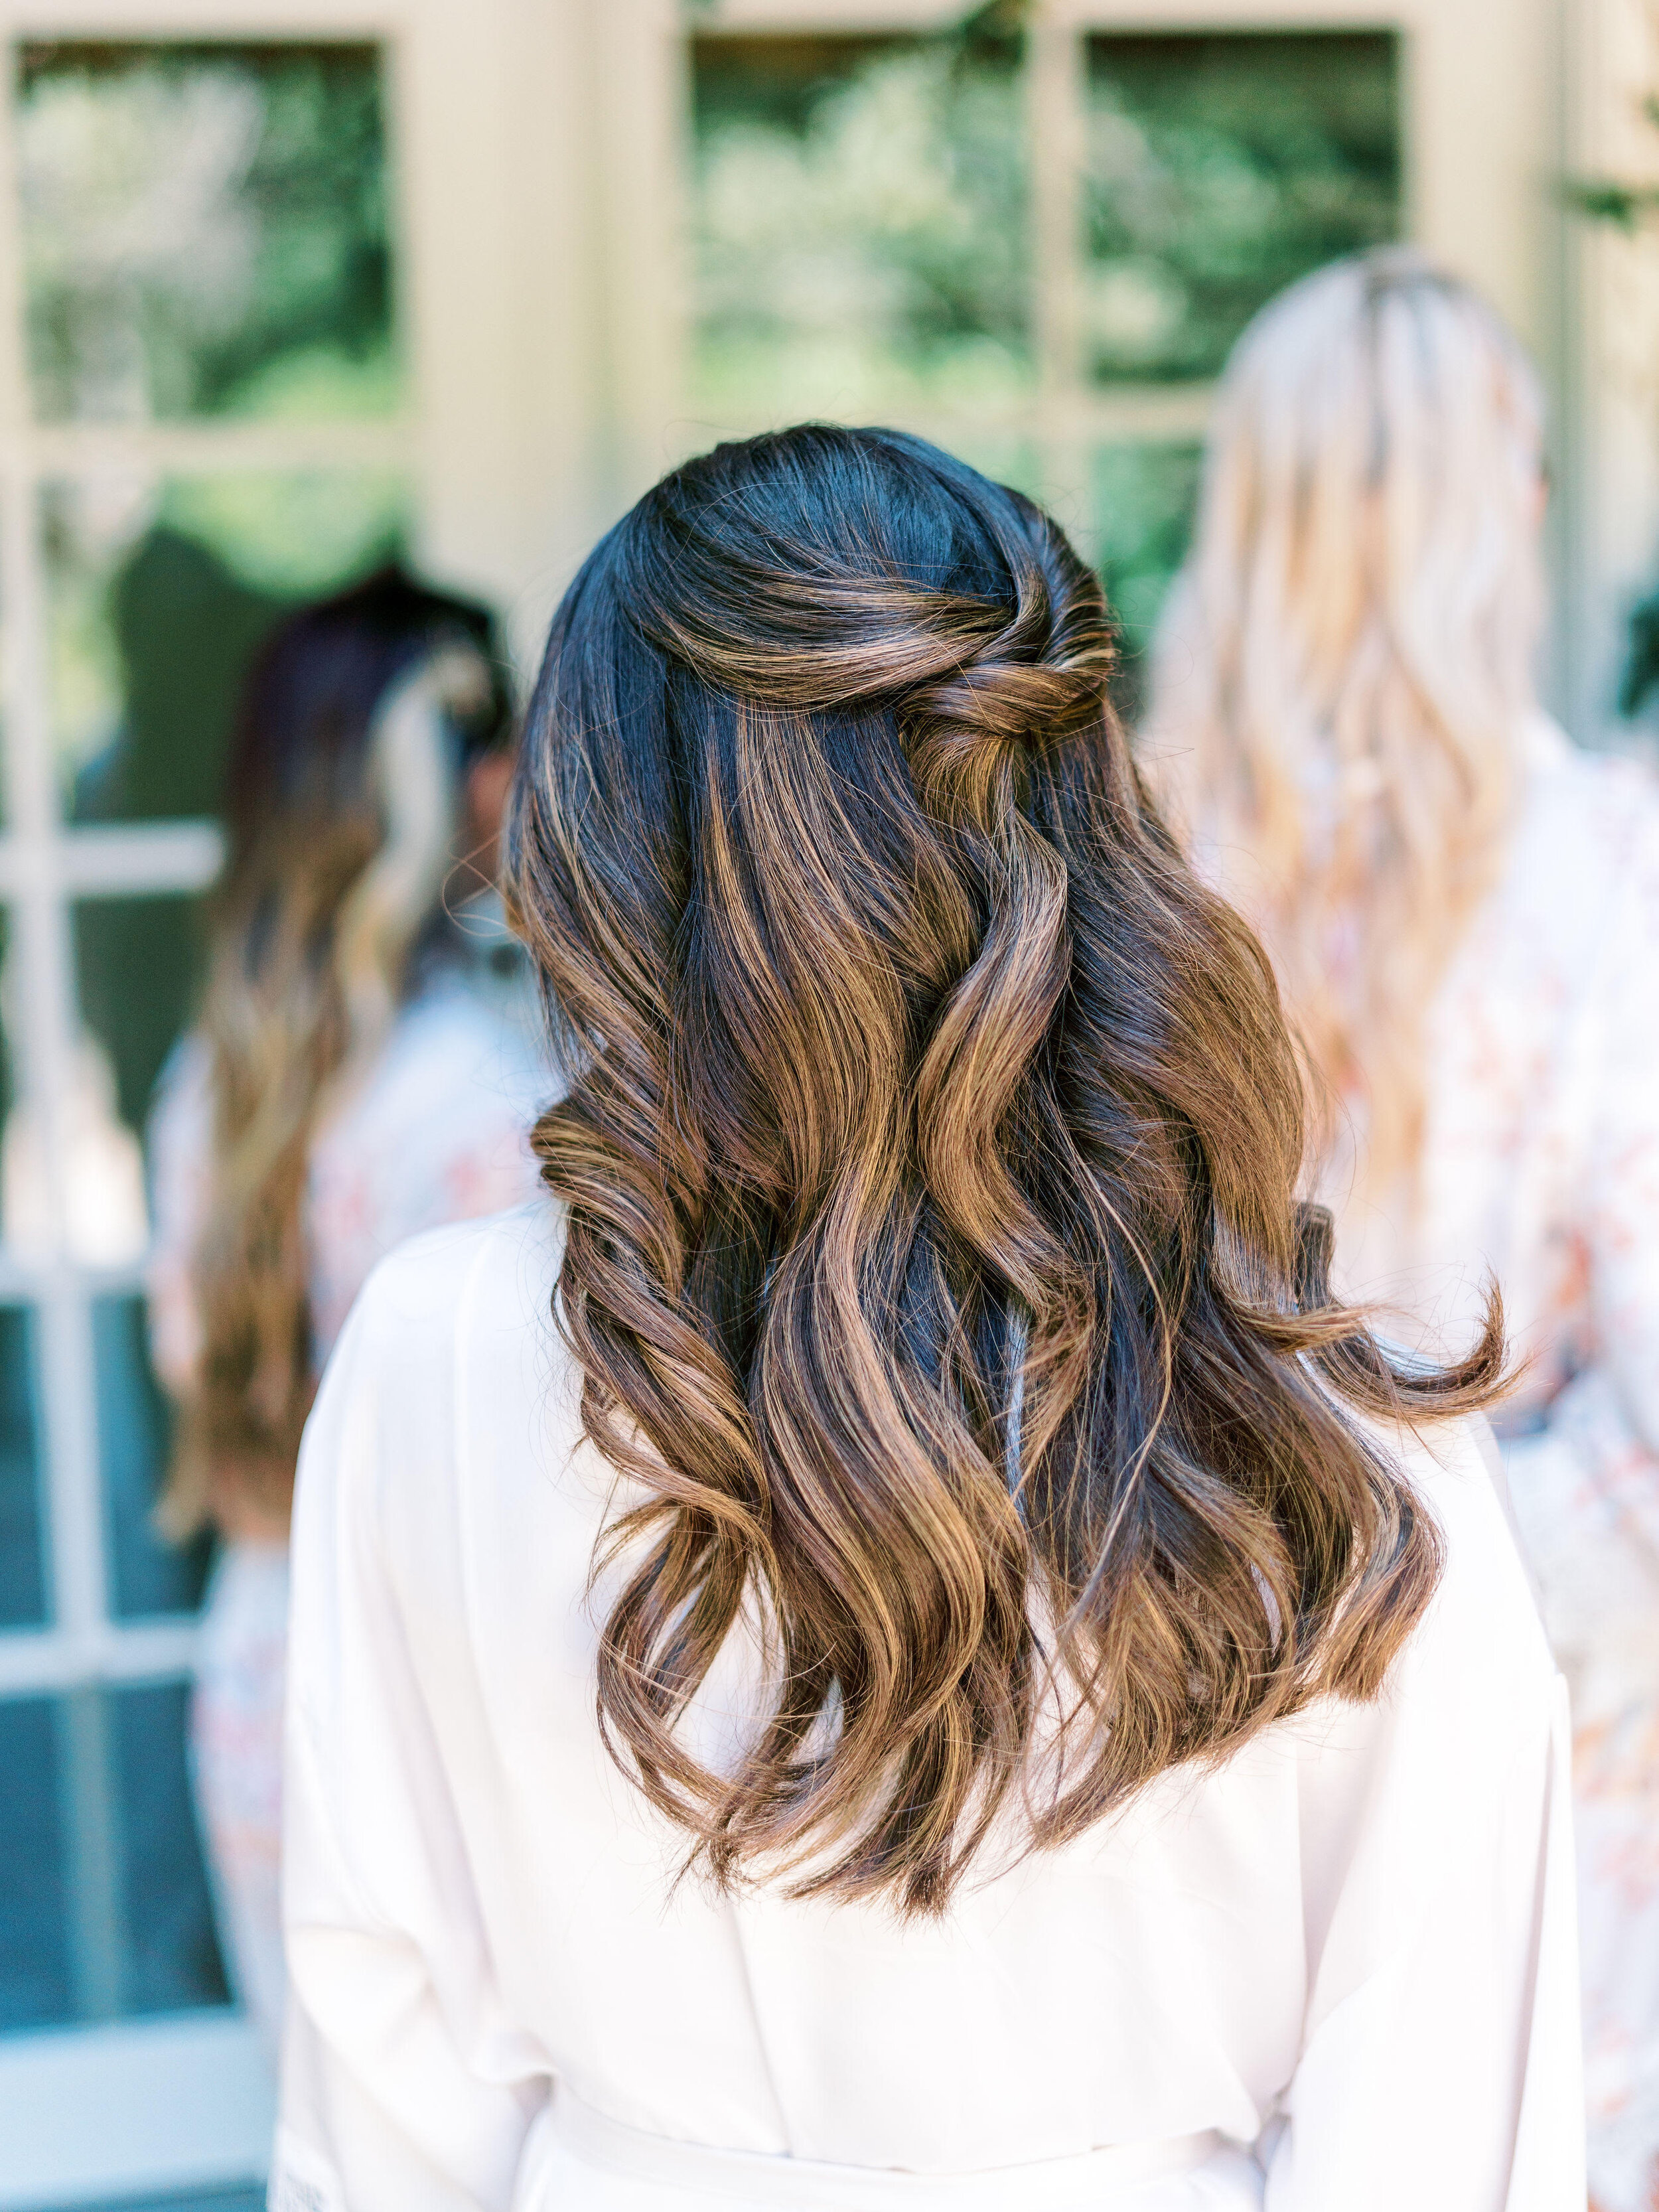 30 Wedding hairstyles and what you need to achieve them — Stevee Danielle  Hair and Makeup / Top Hair and Makeup Company in Las Vegas